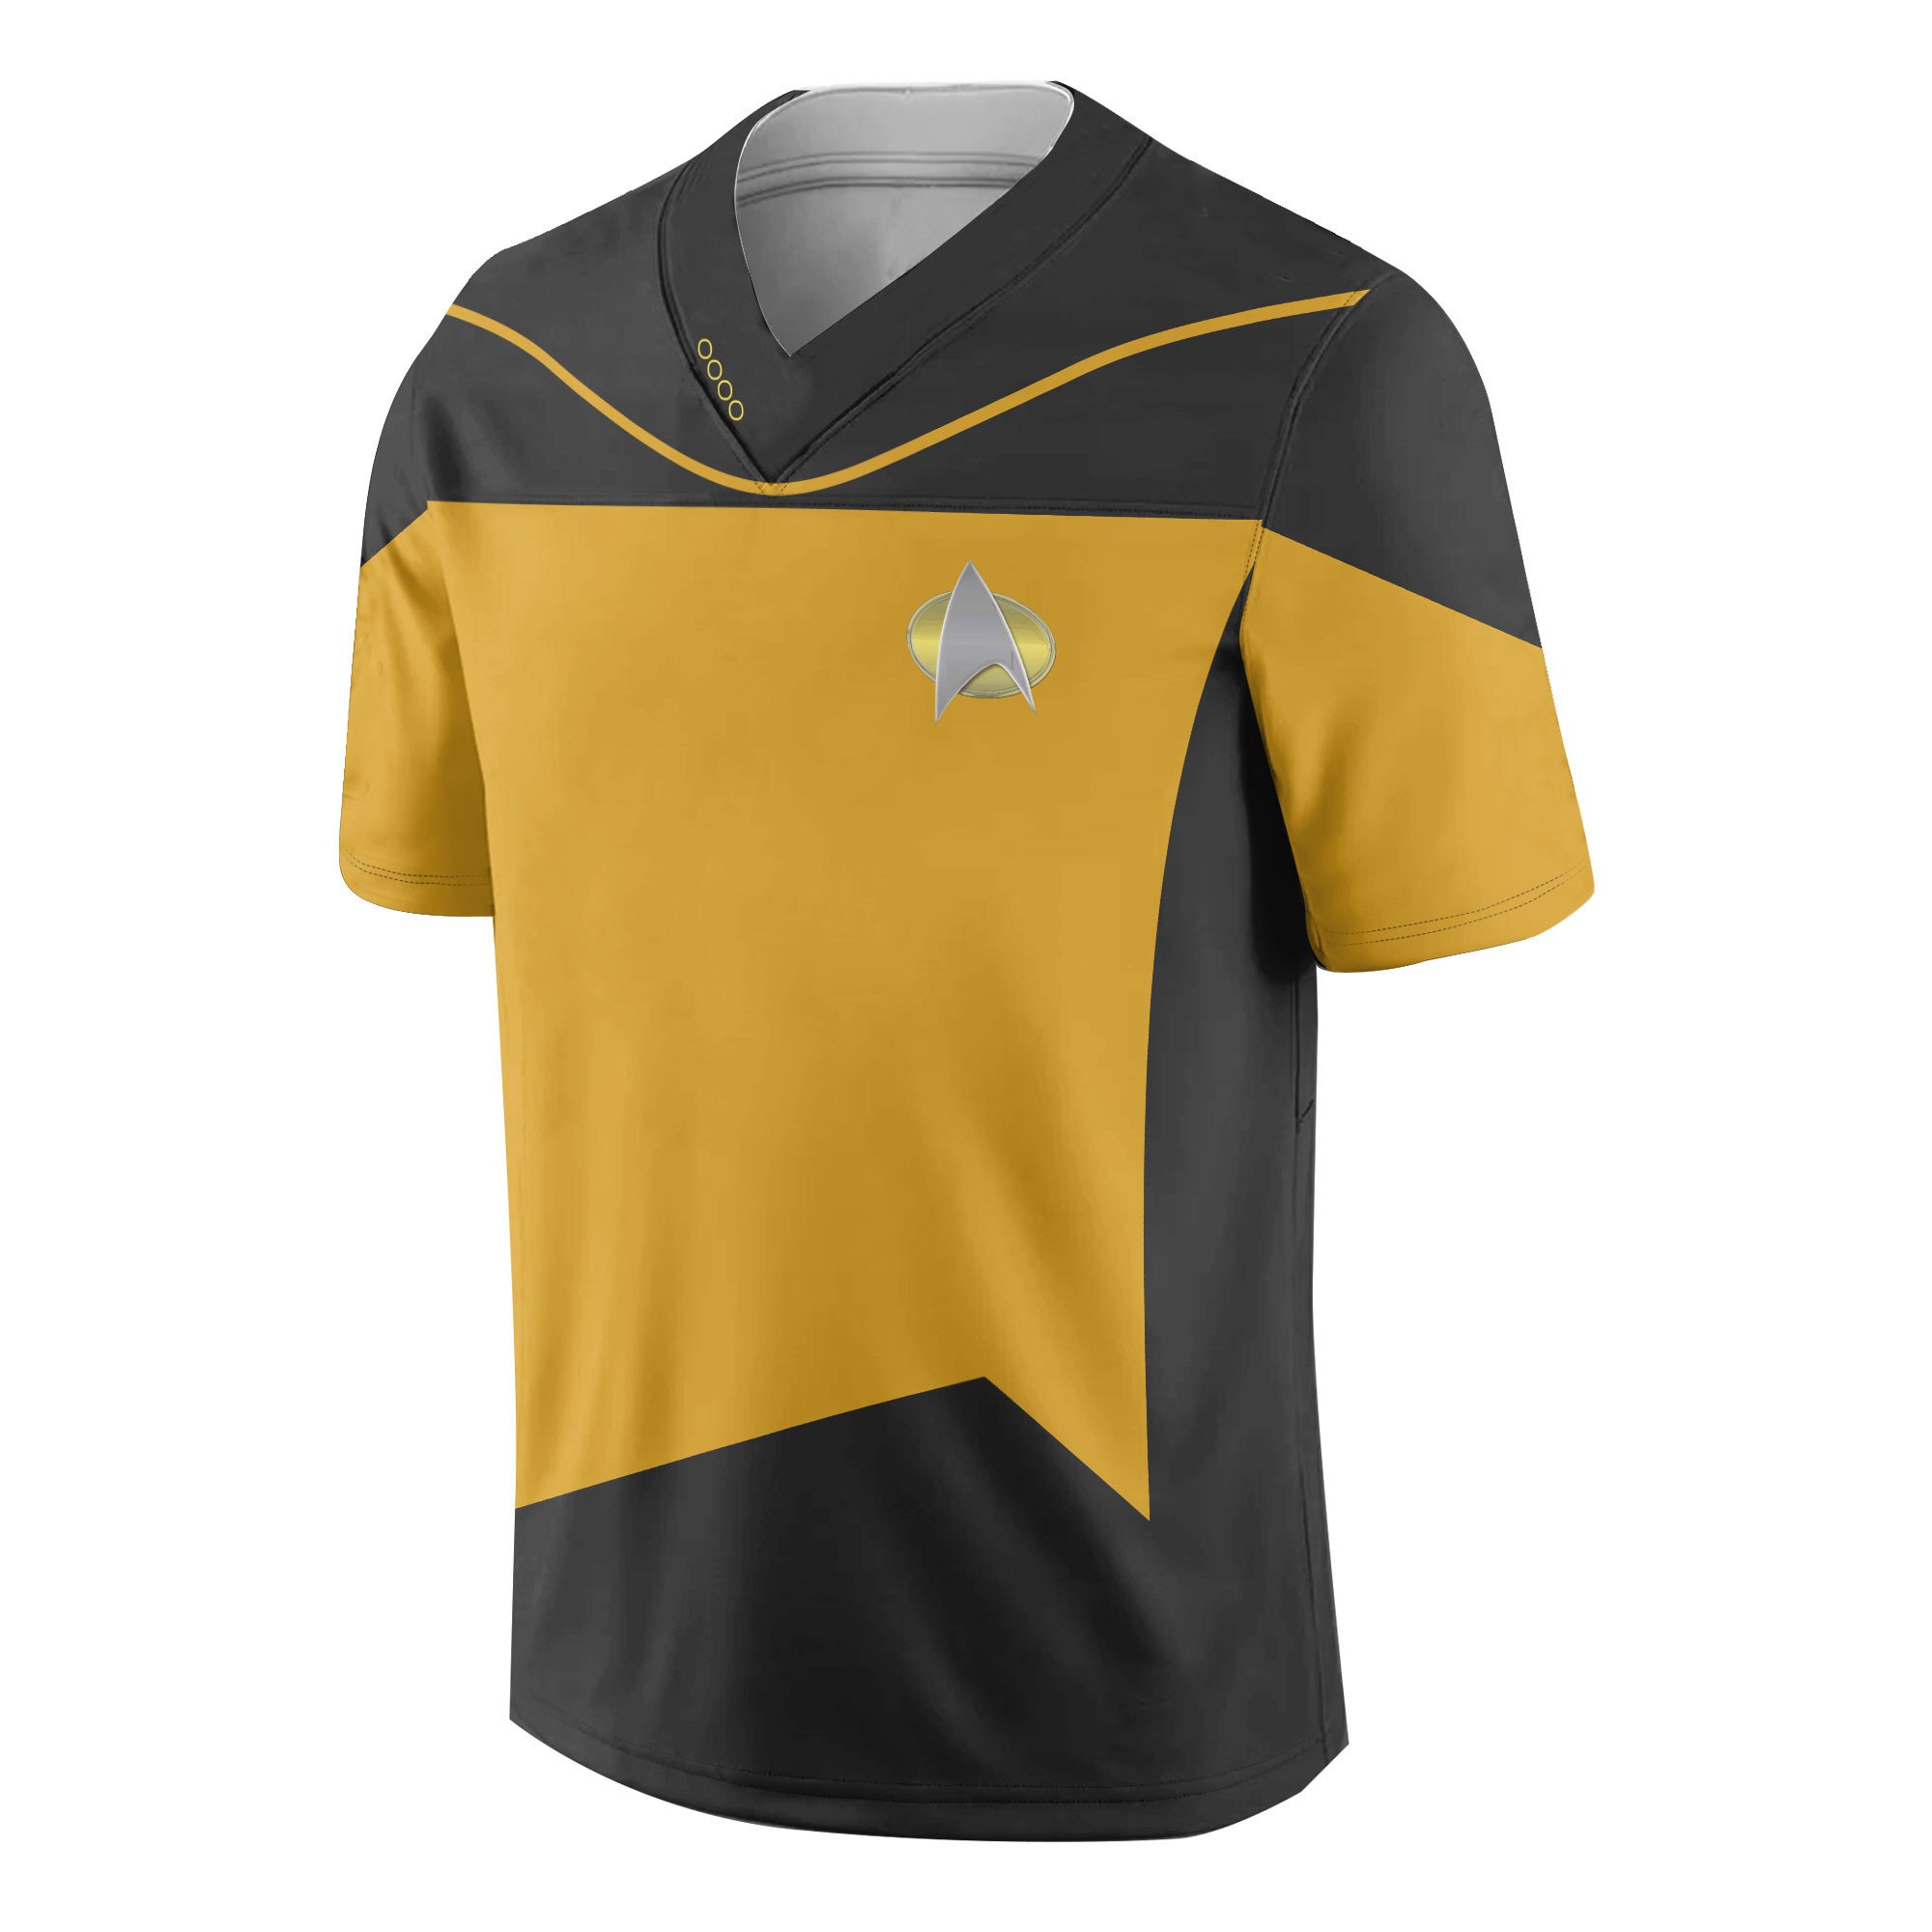 TOP S.T The Next Generation Yellow Version Personalized Custom Football All Over Print Jersey 9